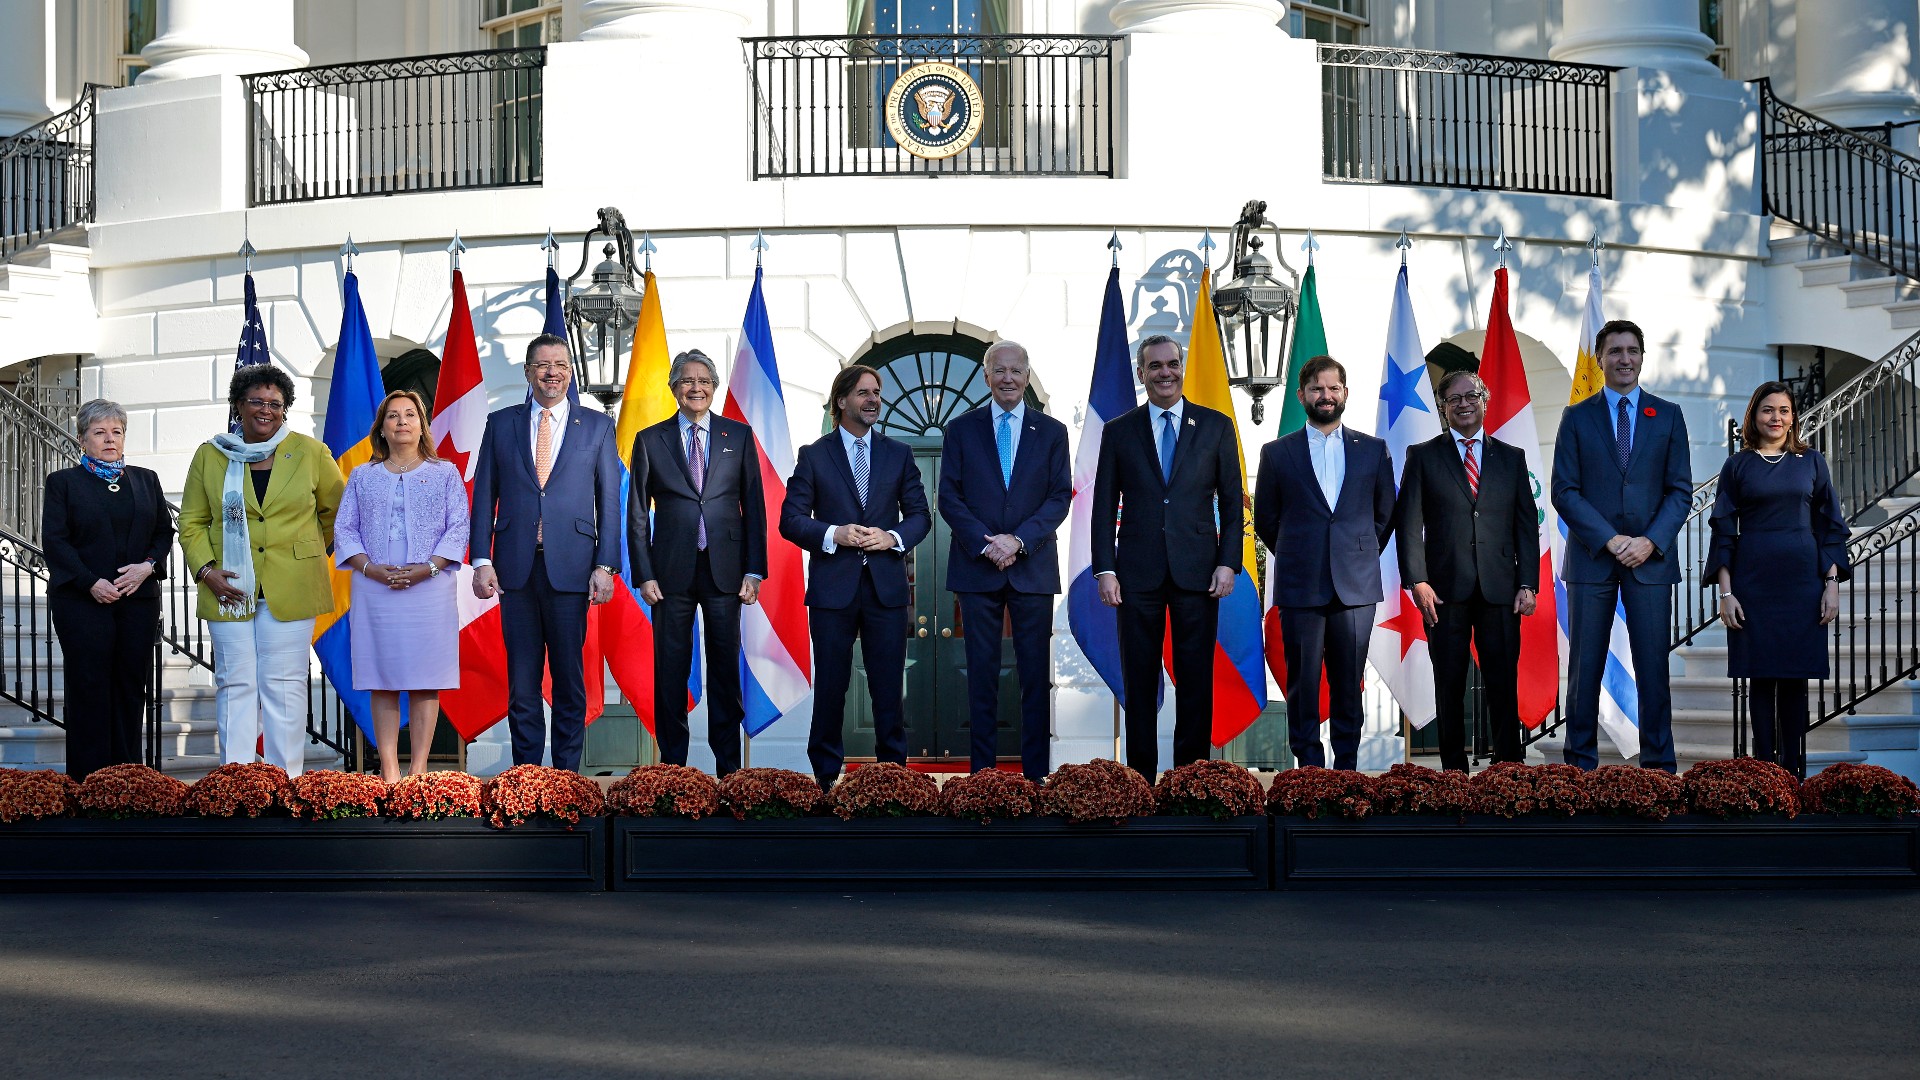 Biden and the leaders of 10 Latin American countries met in Washington to agree on economic measures to boost the region